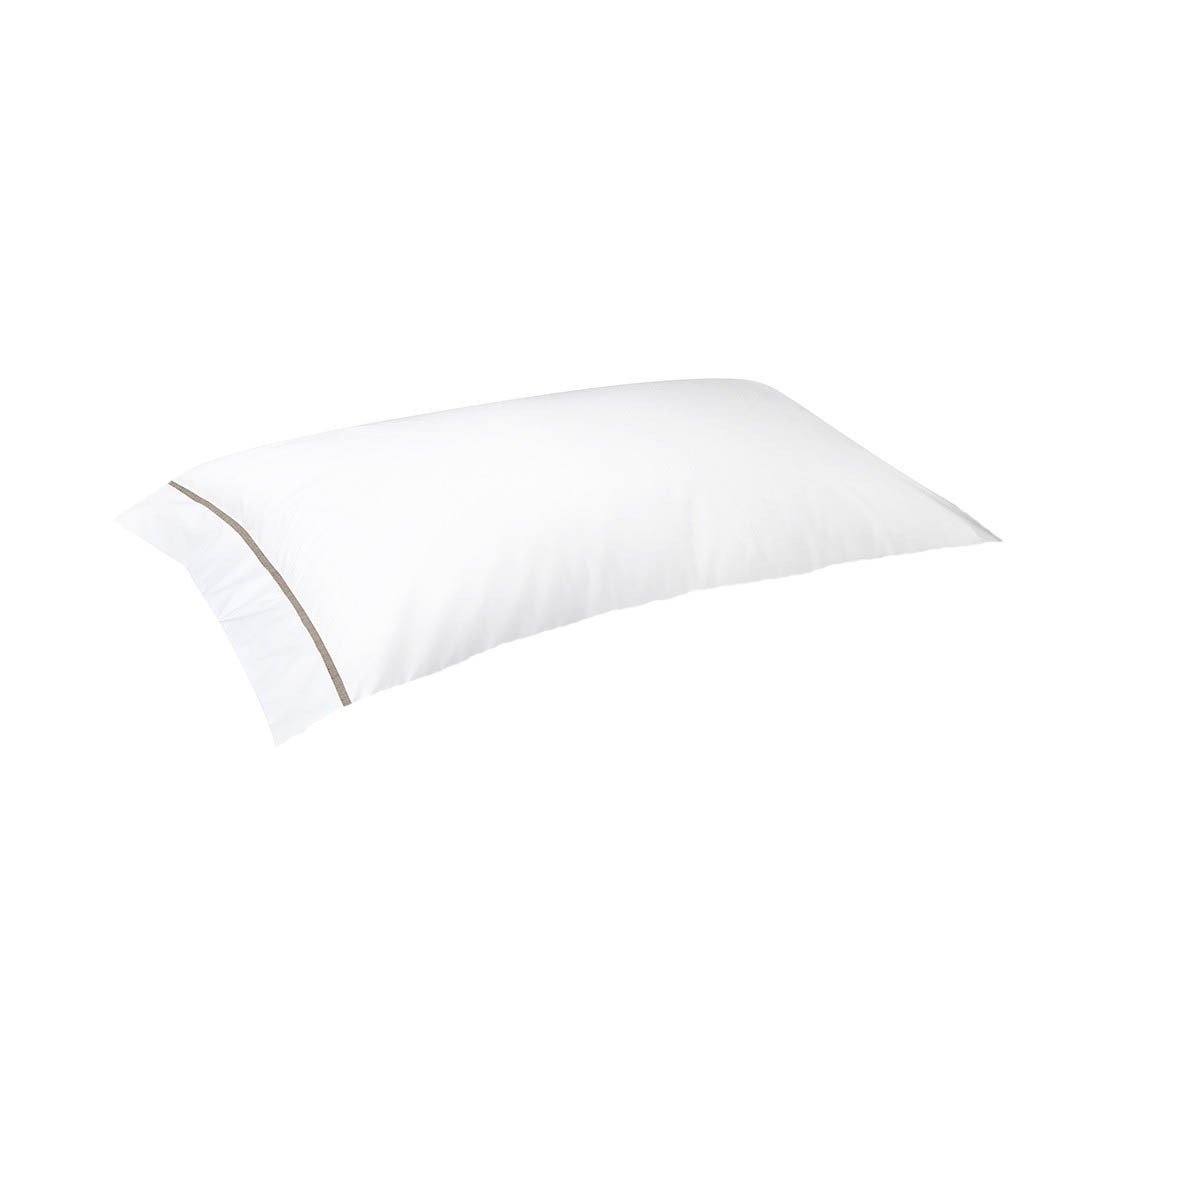 Athena Pierre Bedding Collection by Yves Delorme | Fig Linens - white bed linens, pilowcase